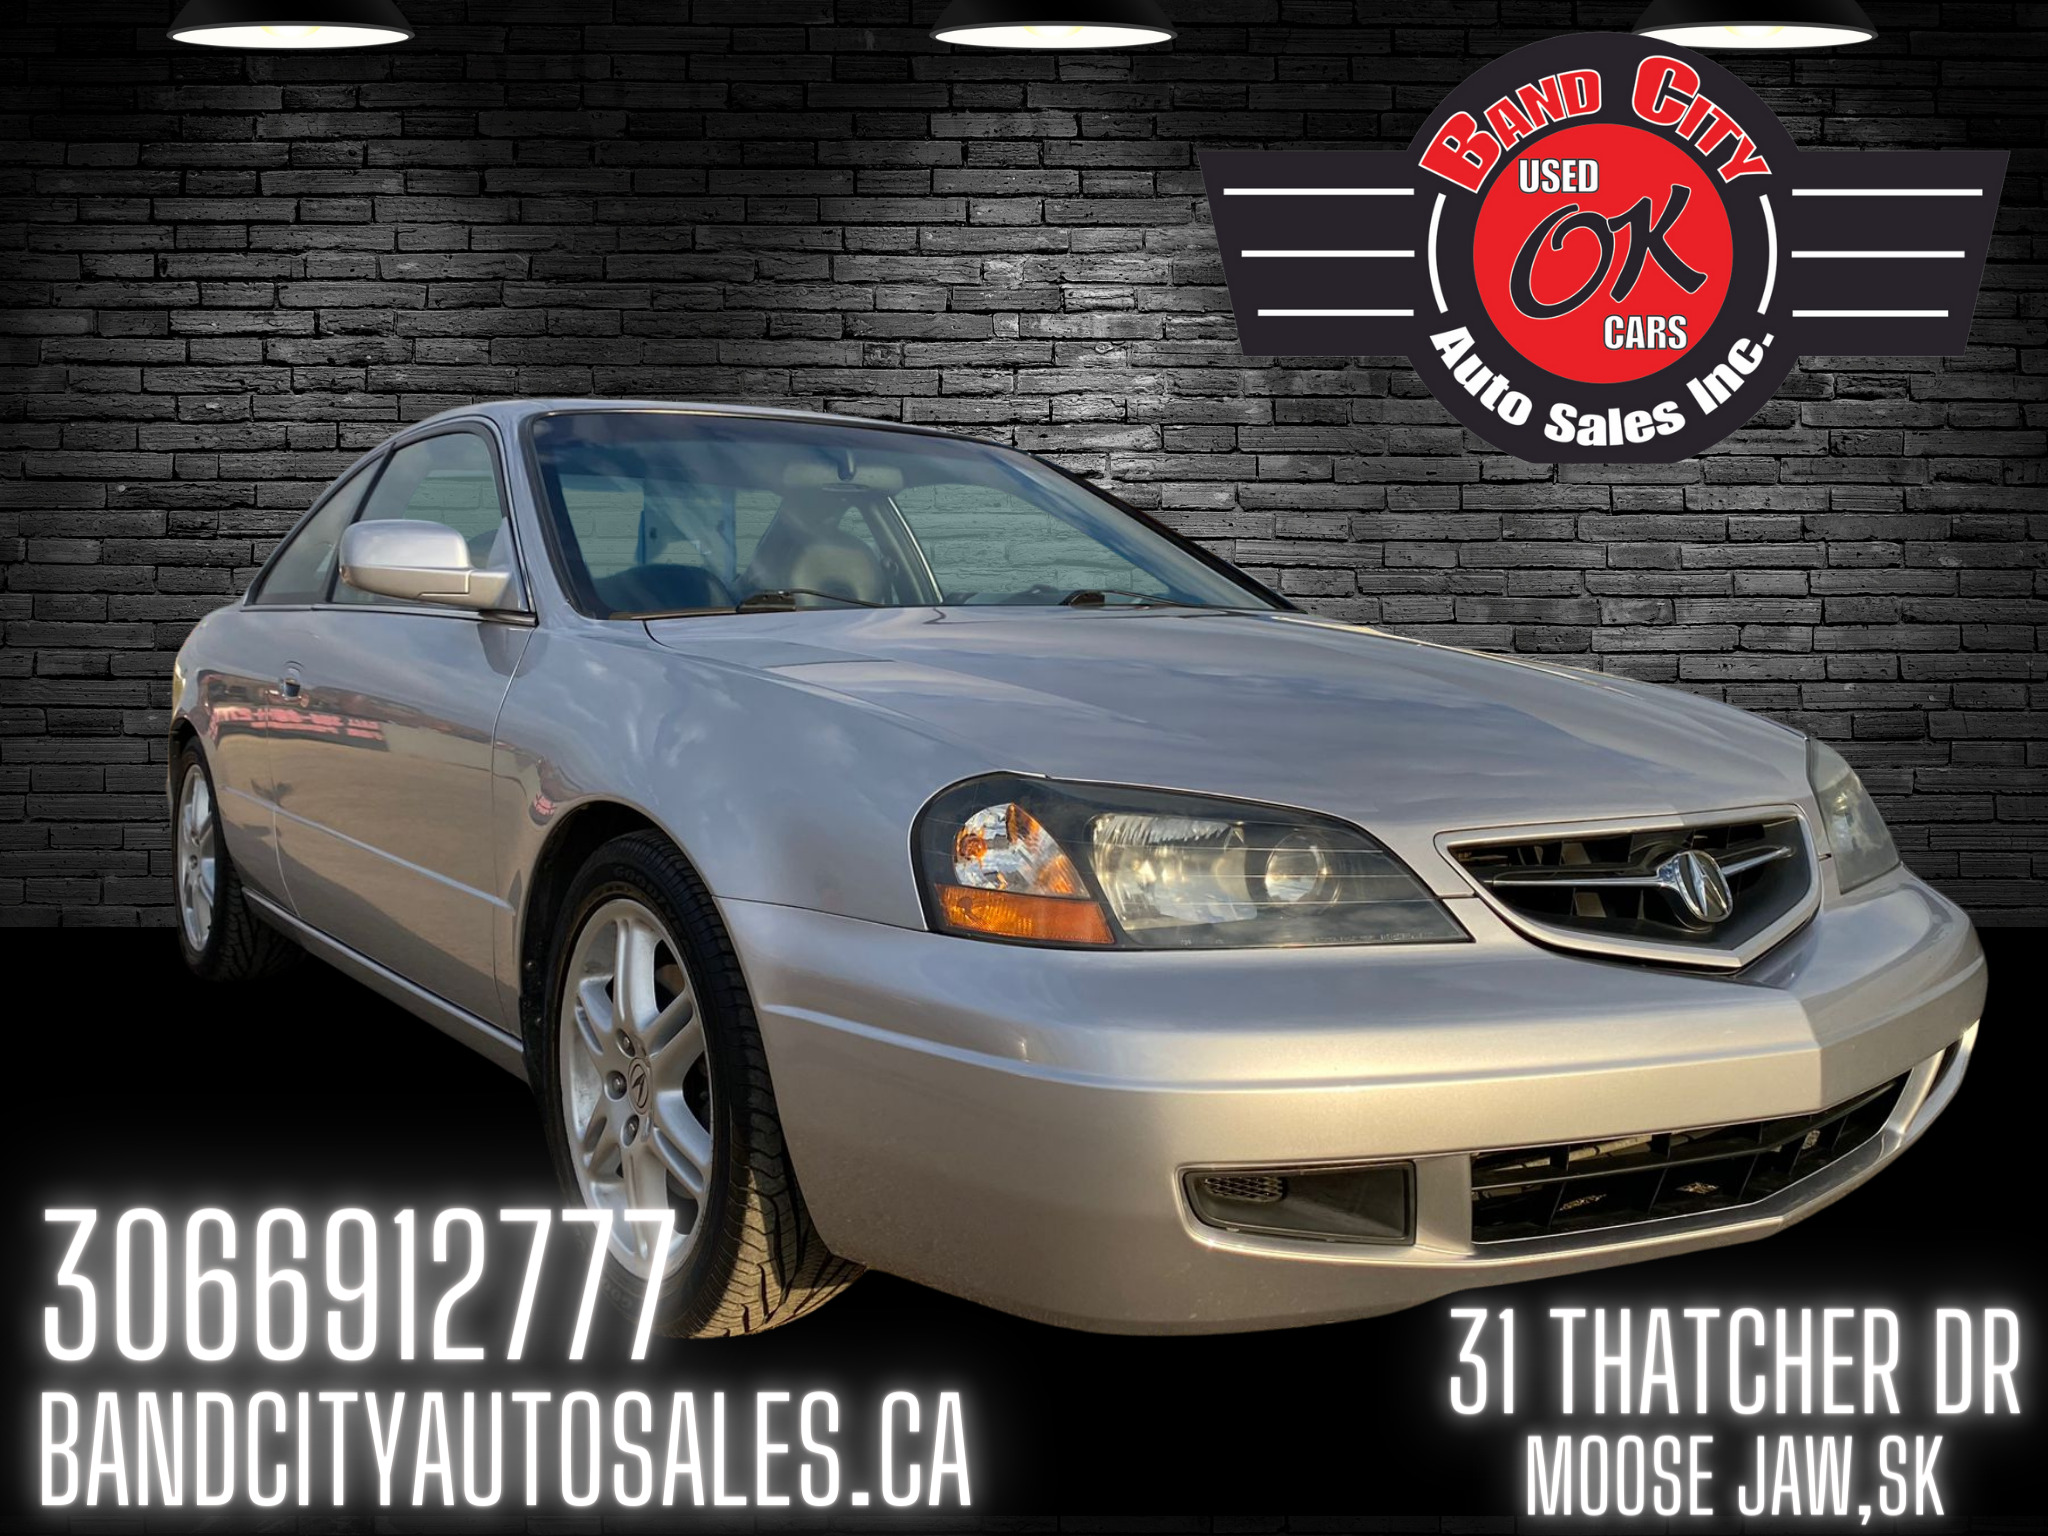 2003 Acura CL 2dr Cpe 3.2L Type S Manual